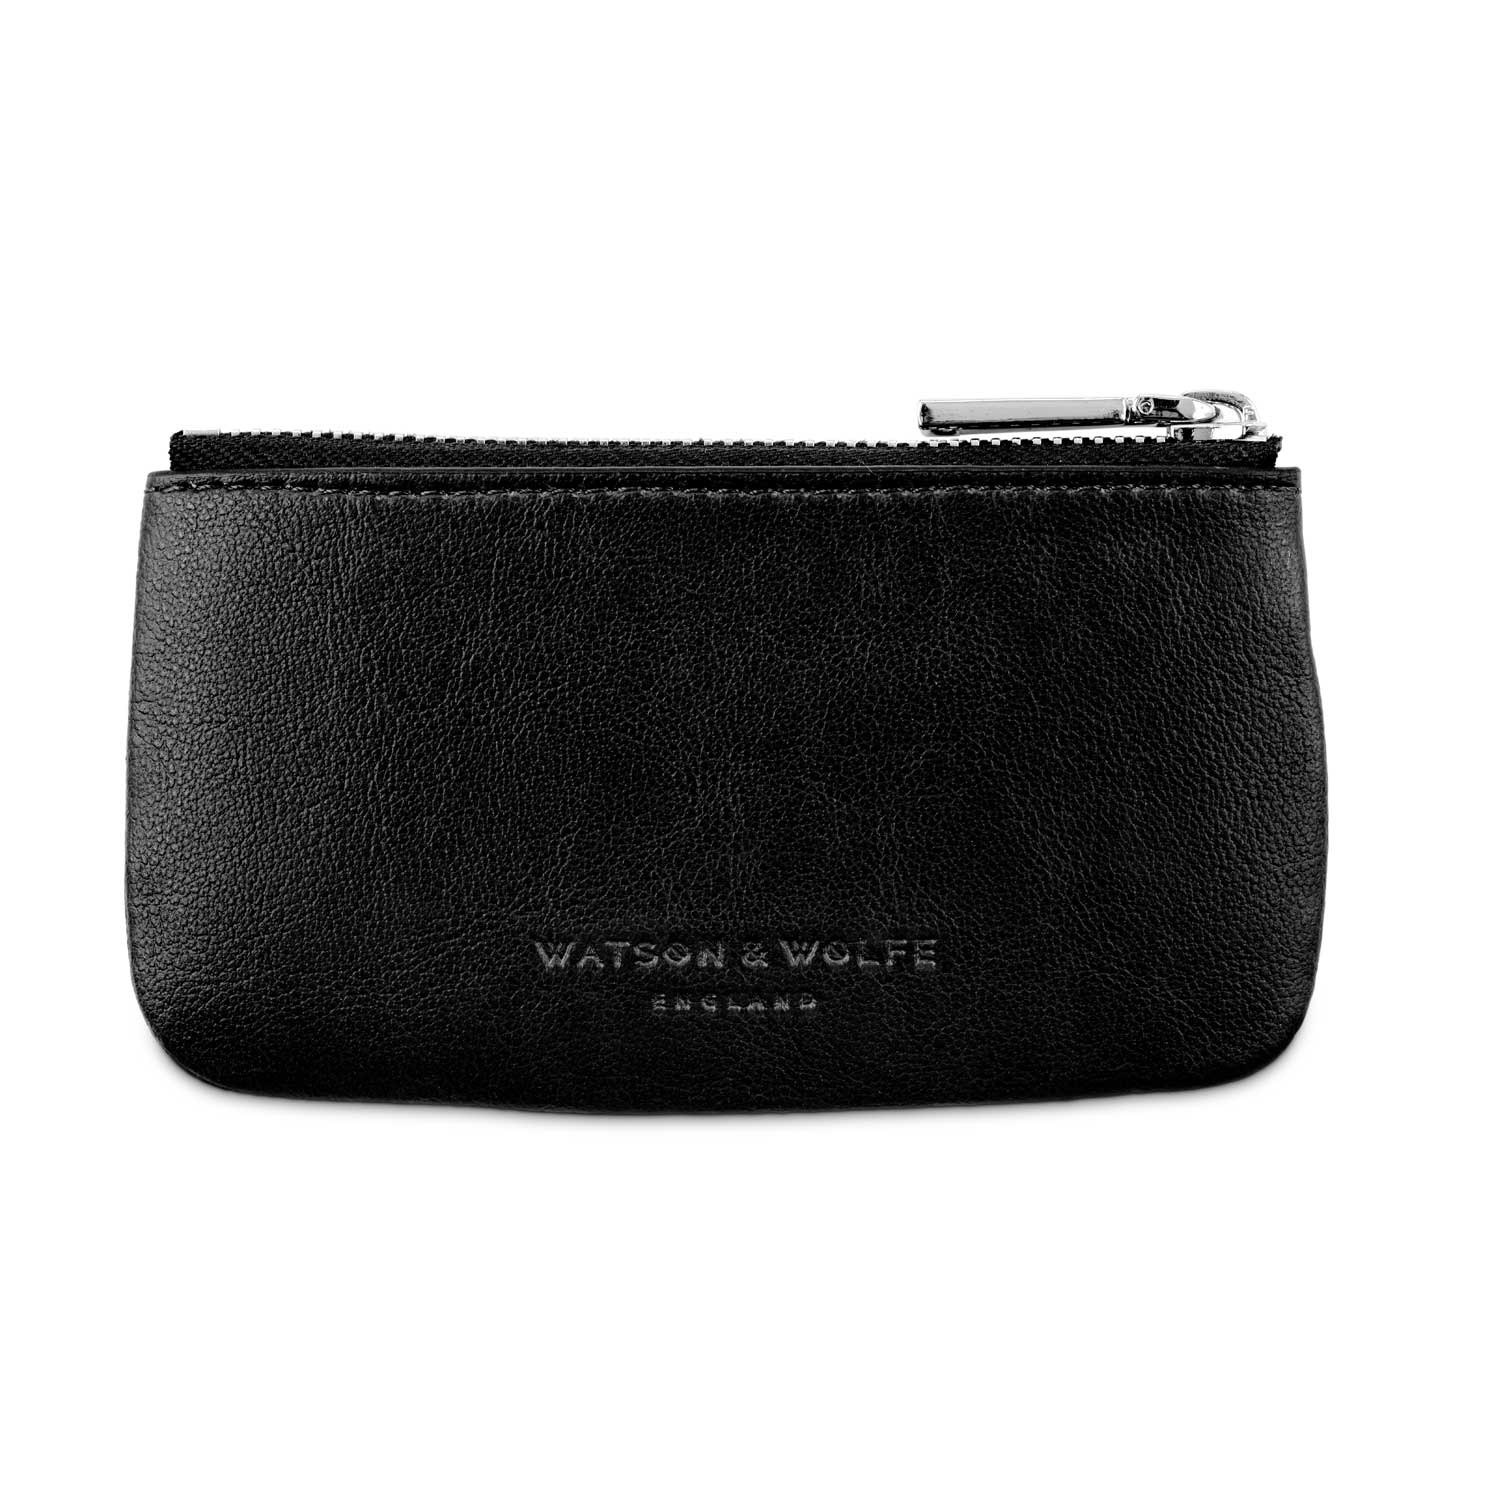 Watson & Wolfe Zipped Vegan Leather RFID Protective Card, Coin & Key Case | Black